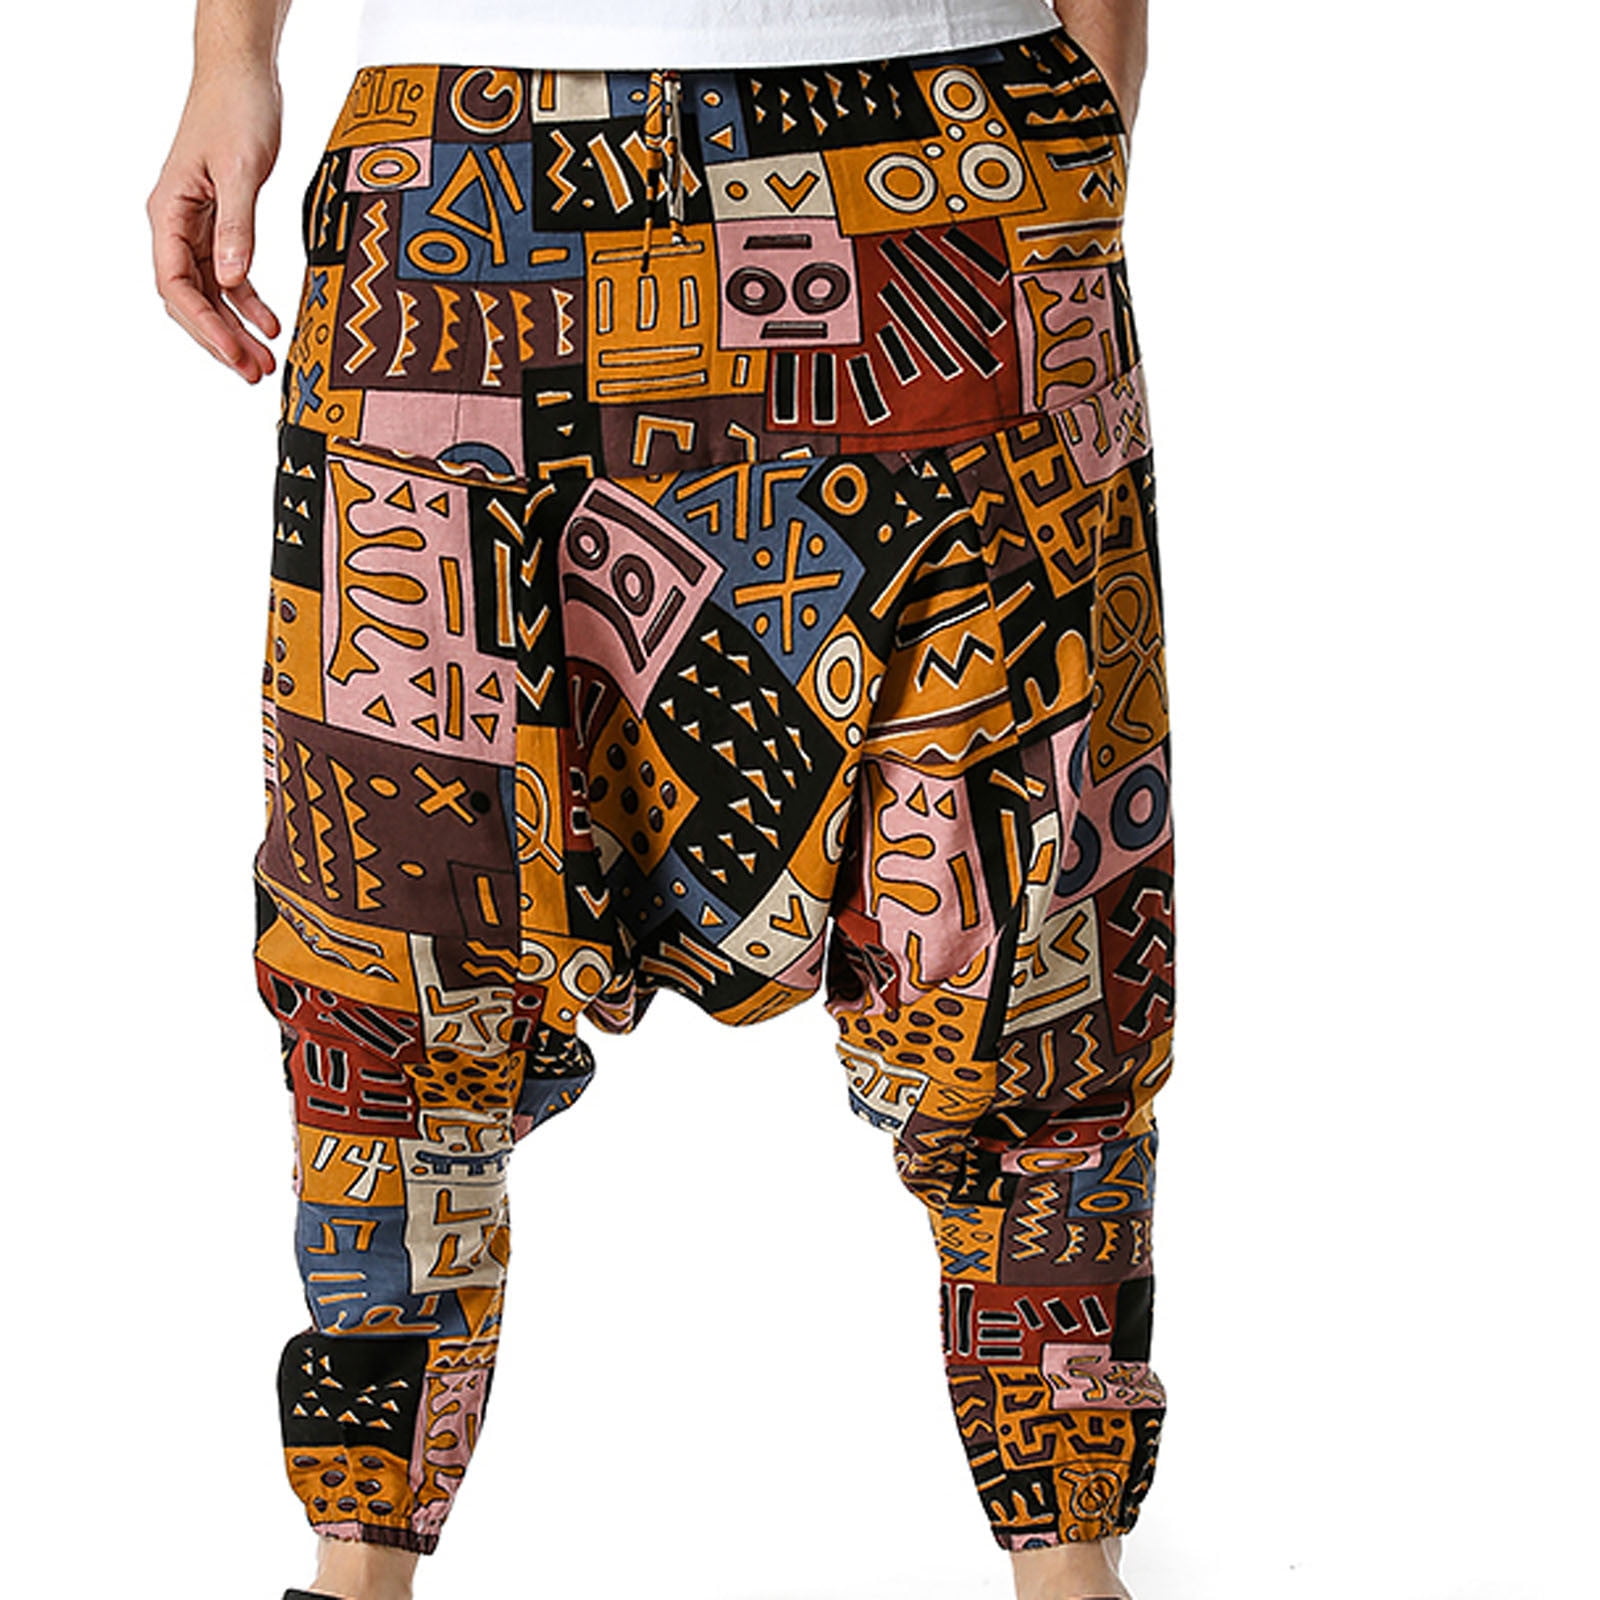 Denim Printed Funky Men''s Jeans, Waist Size: 28-34 at Rs 699/piece in Surat